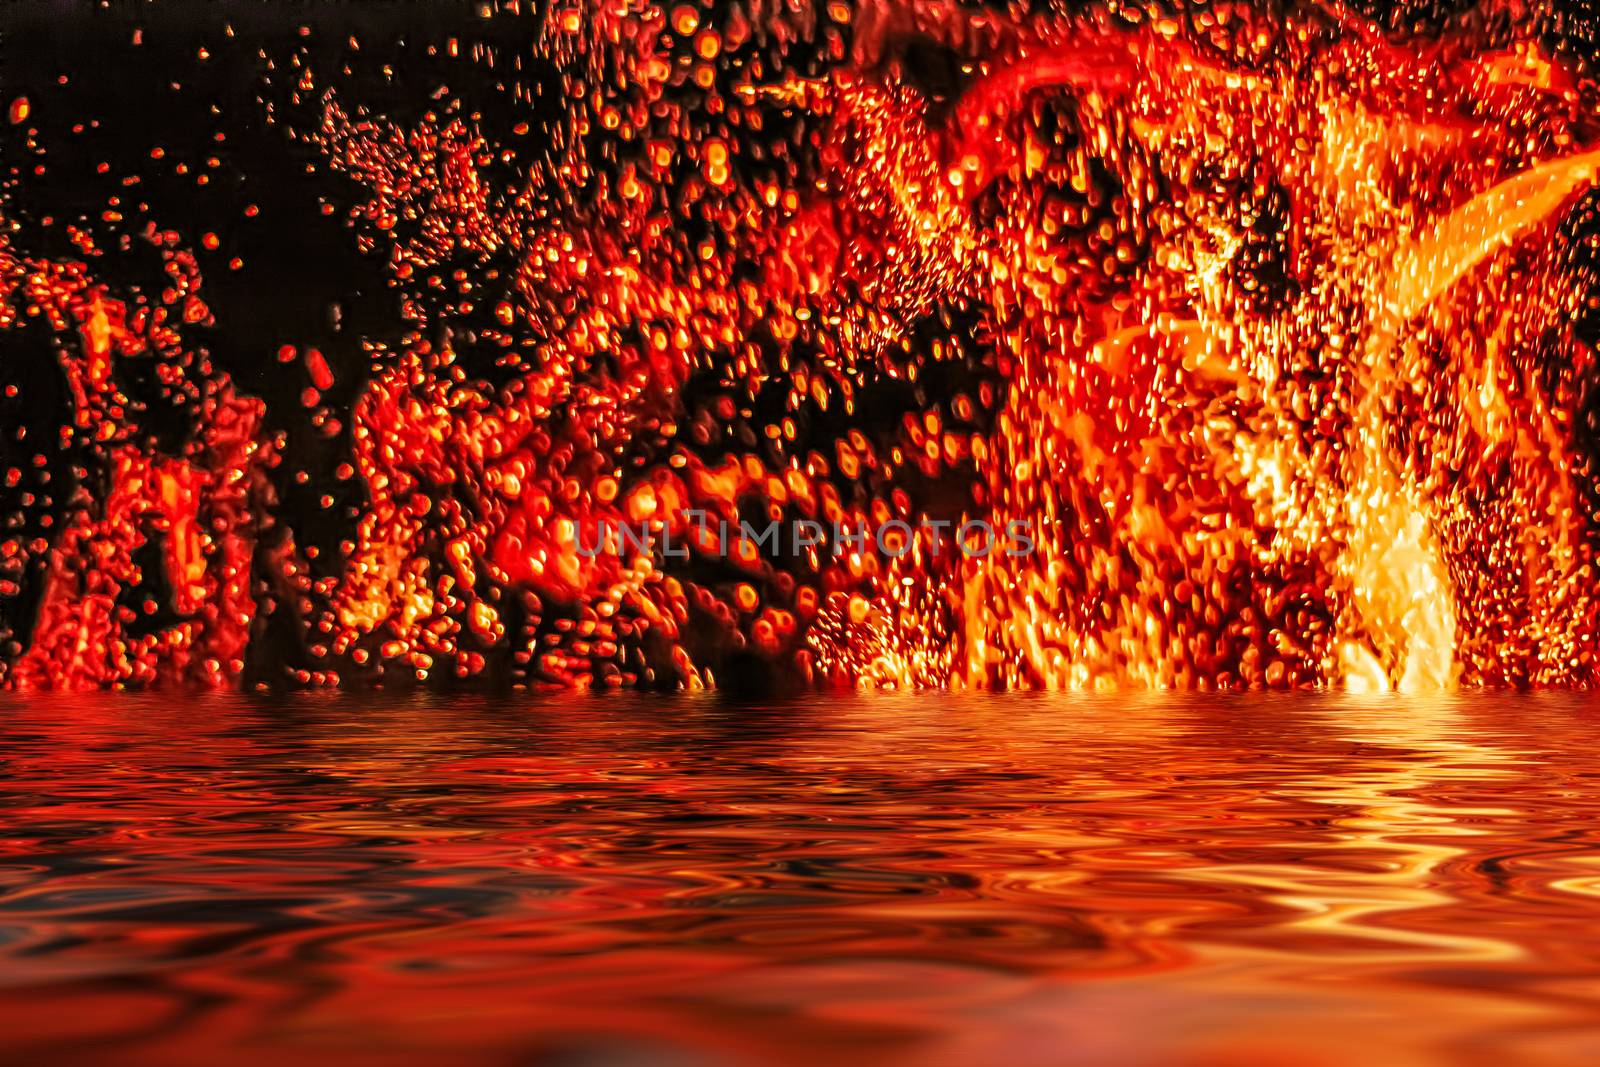 Hot fire flames in water as nature element and abstract backgrou by Anneleven